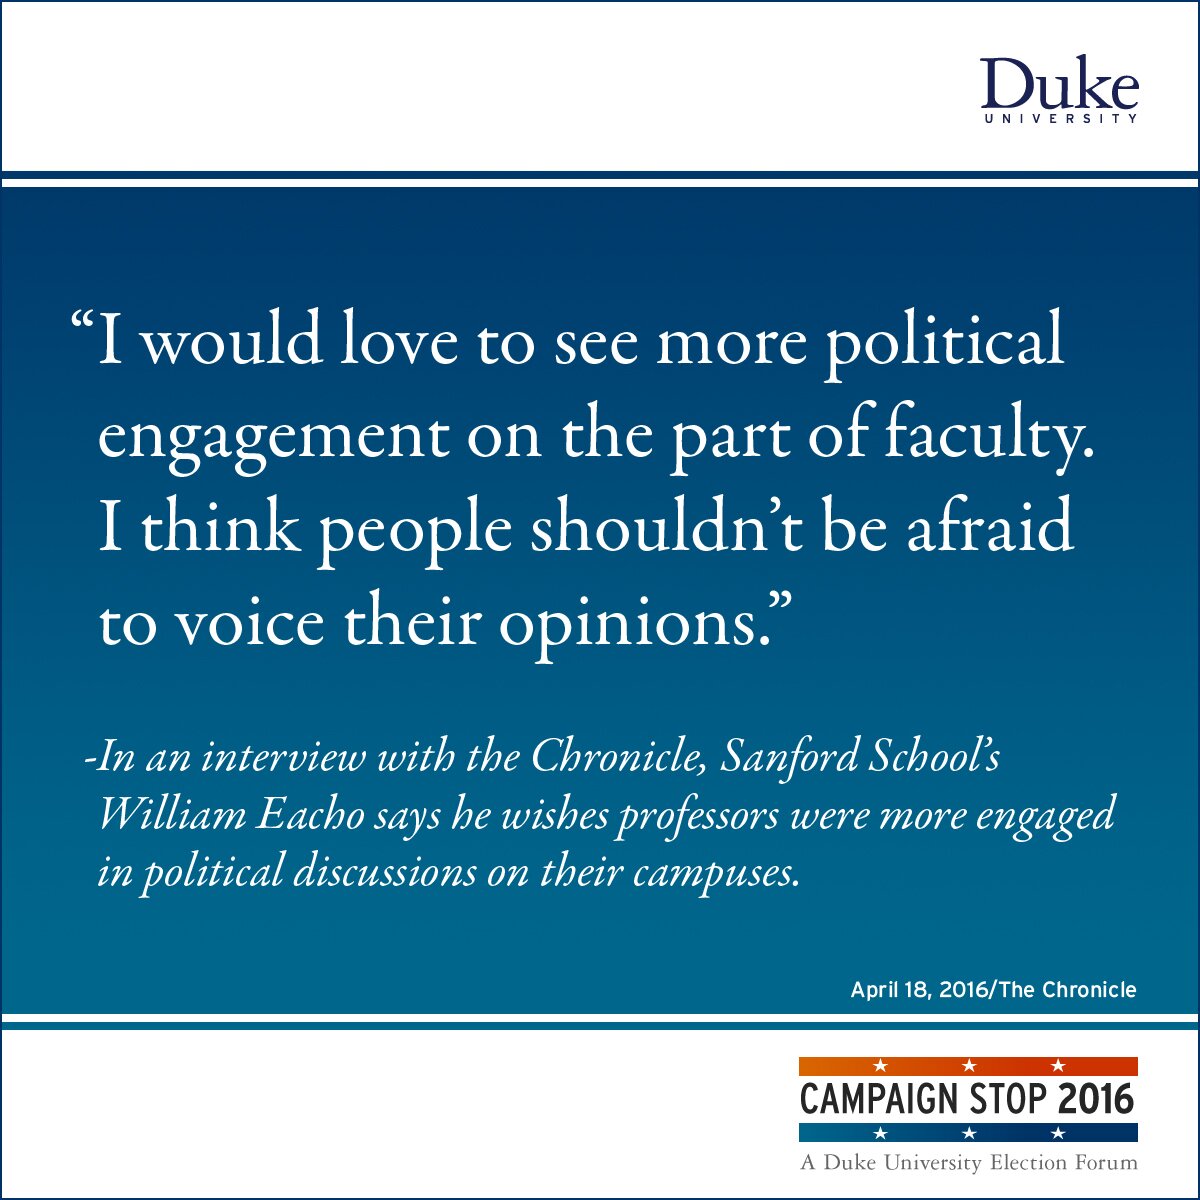 “I would love to see more political engagement on the part of faculty. I think people shouldn’t be afraid to voice their opinions.” -In an interview with the Chronicle, Sanford School’s William Eacho says he wishes professors were more engaged in political discussions on their campuses.